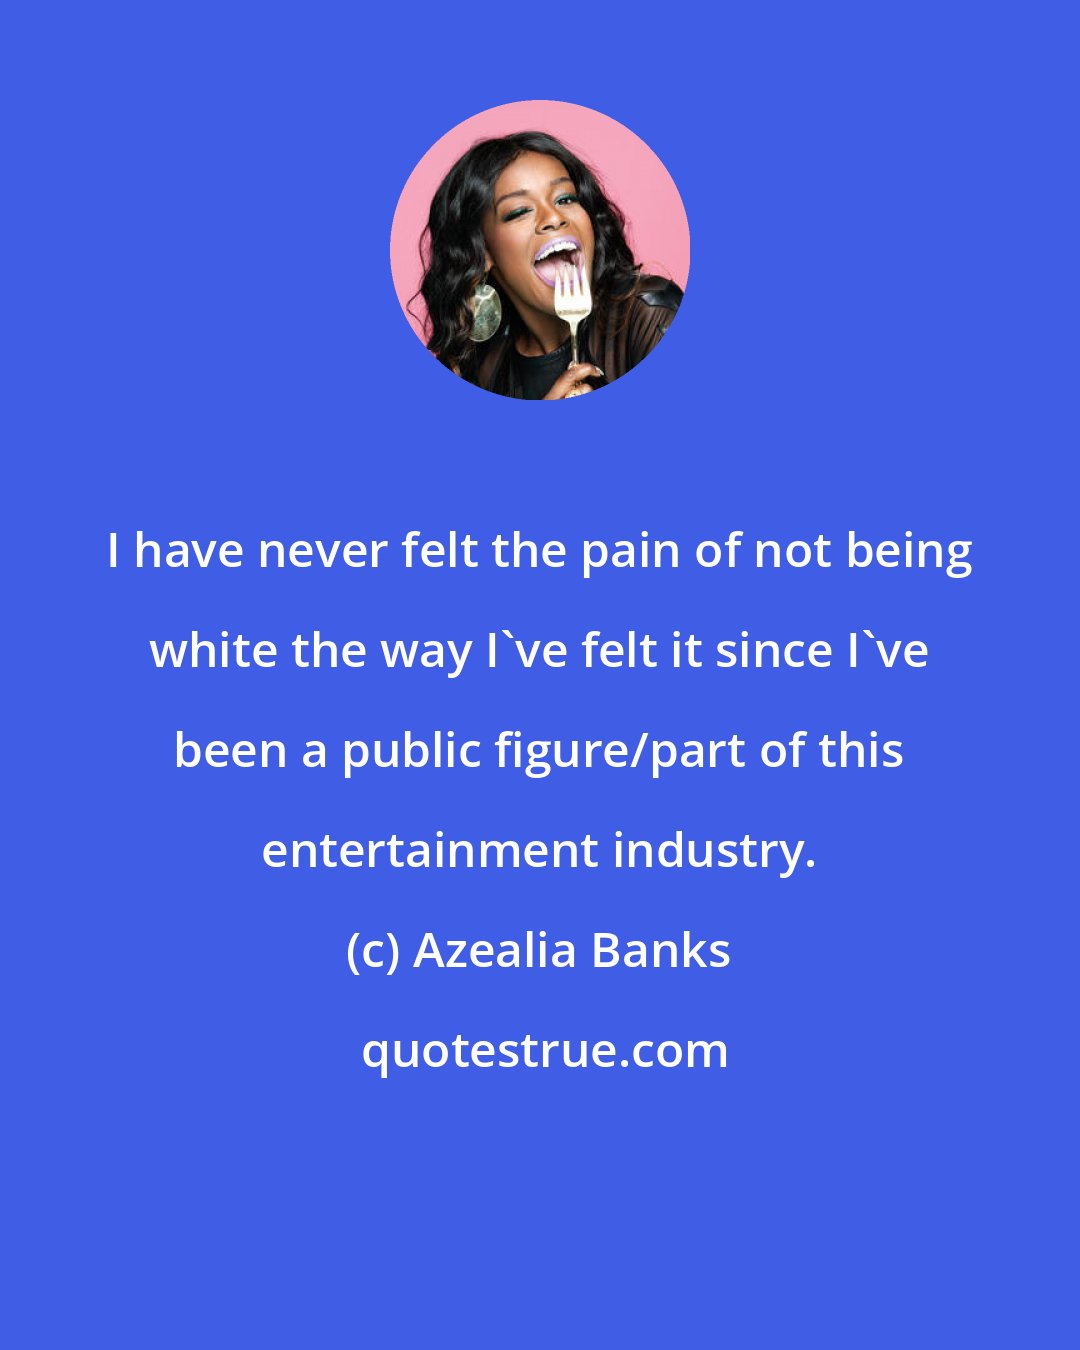 Azealia Banks: I have never felt the pain of not being white the way I've felt it since I've been a public figure/part of this entertainment industry.